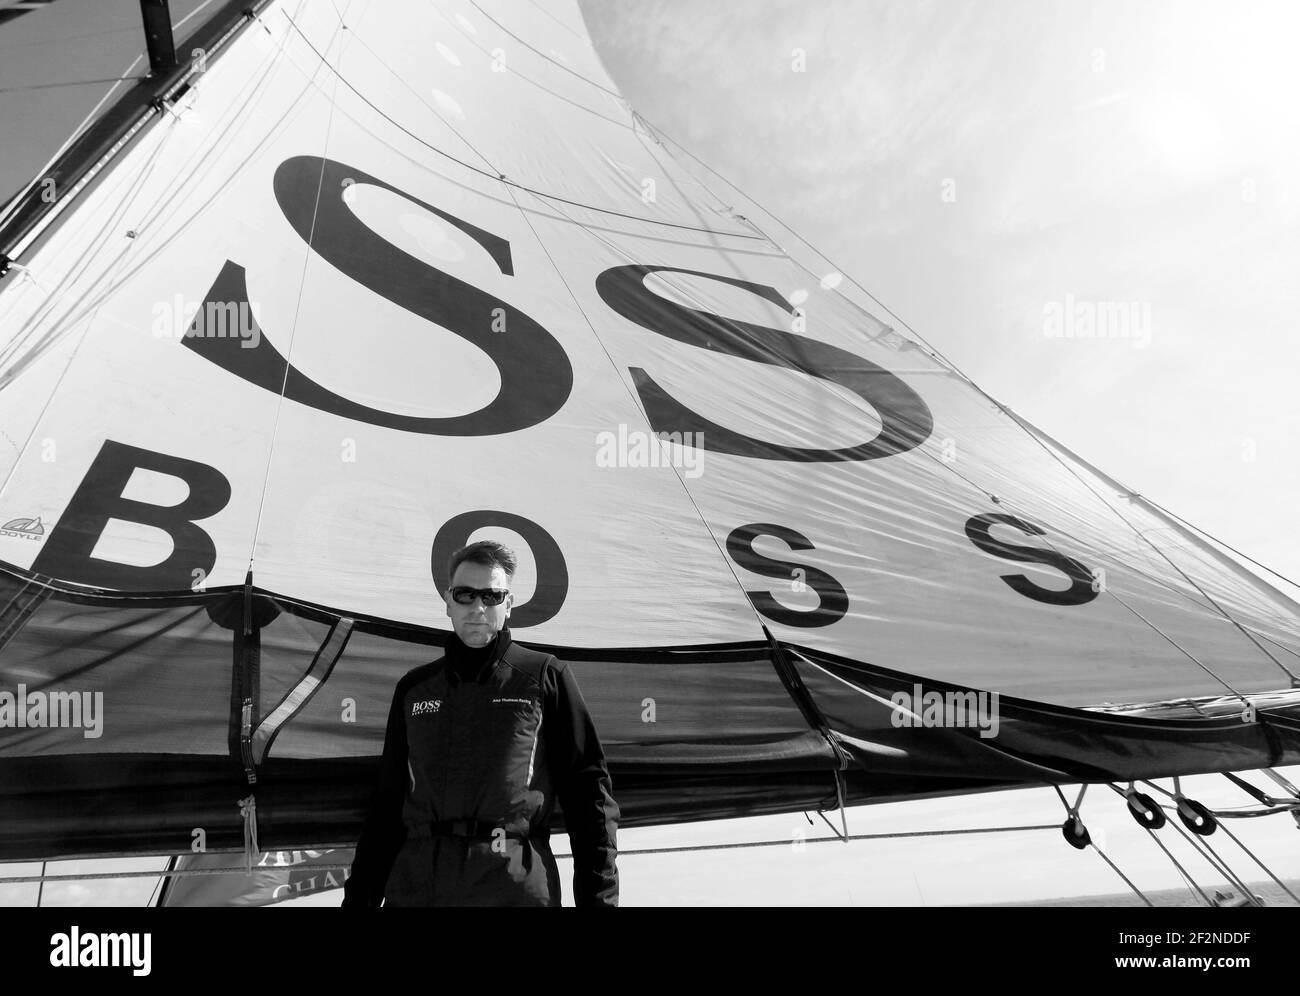 SAILING - ARTEMIS CHALLENGE - AROUND THE ISLE OF WIGHT - GREAT BRITAIN - 10/08/2011 - PHOTO : CHRISTOPHE LAUNAY / DPPI - Onboard Hugo Boss - Skipper Alex Thomson & Crew along with celebrity Ewan McGregor (Actor) Stock Photo